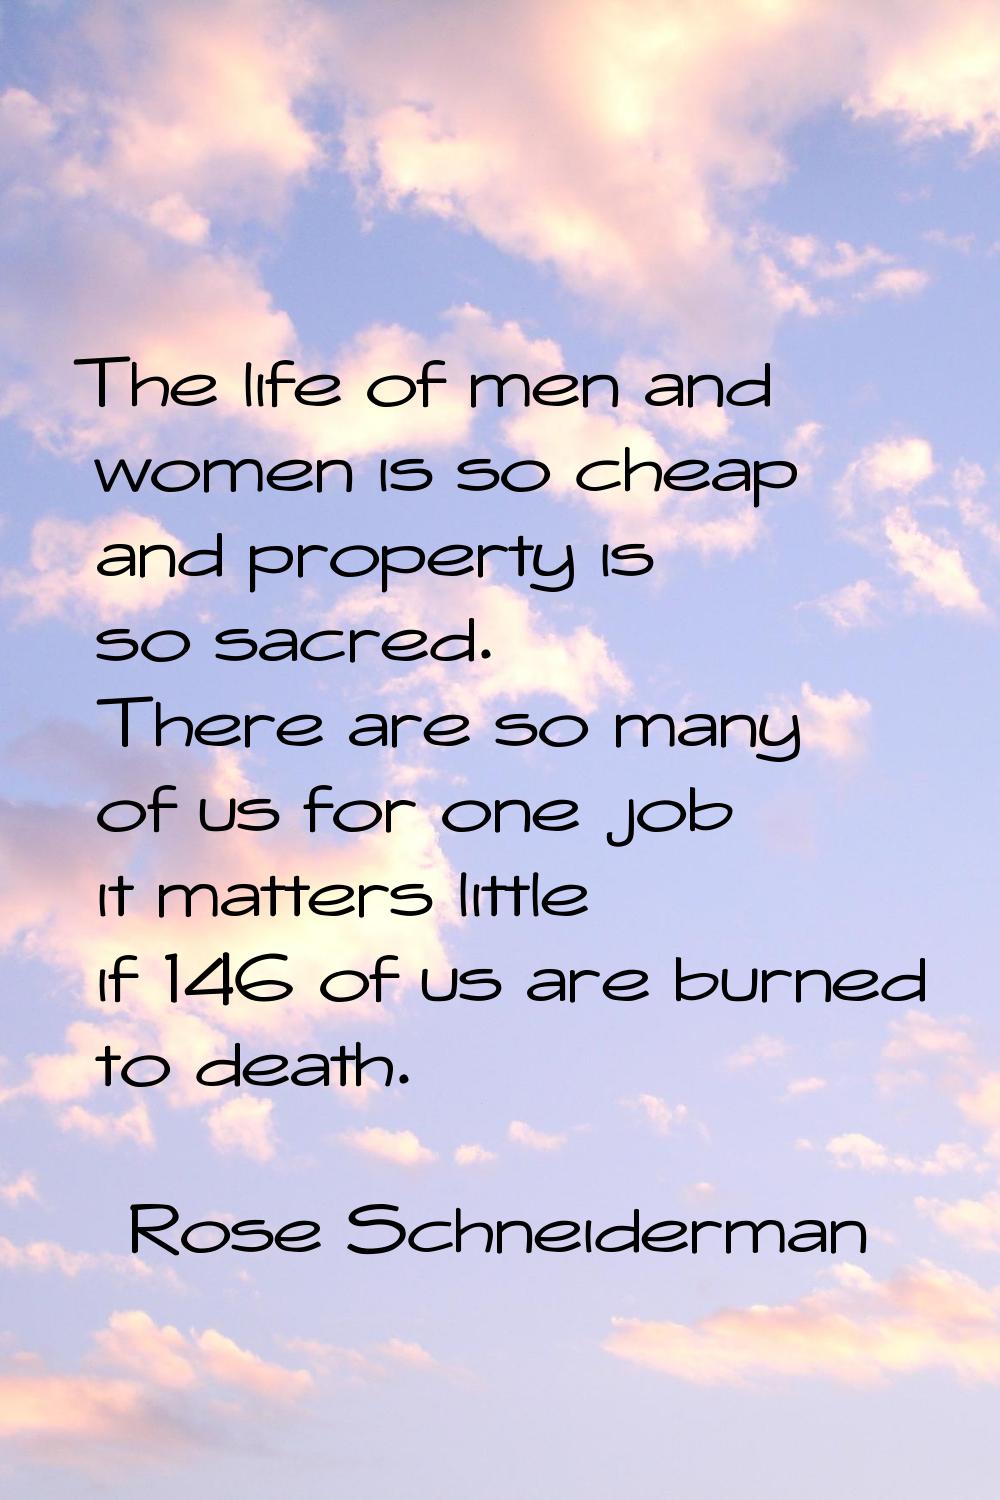 The life of men and women is so cheap and property is so sacred. There are so many of us for one jo